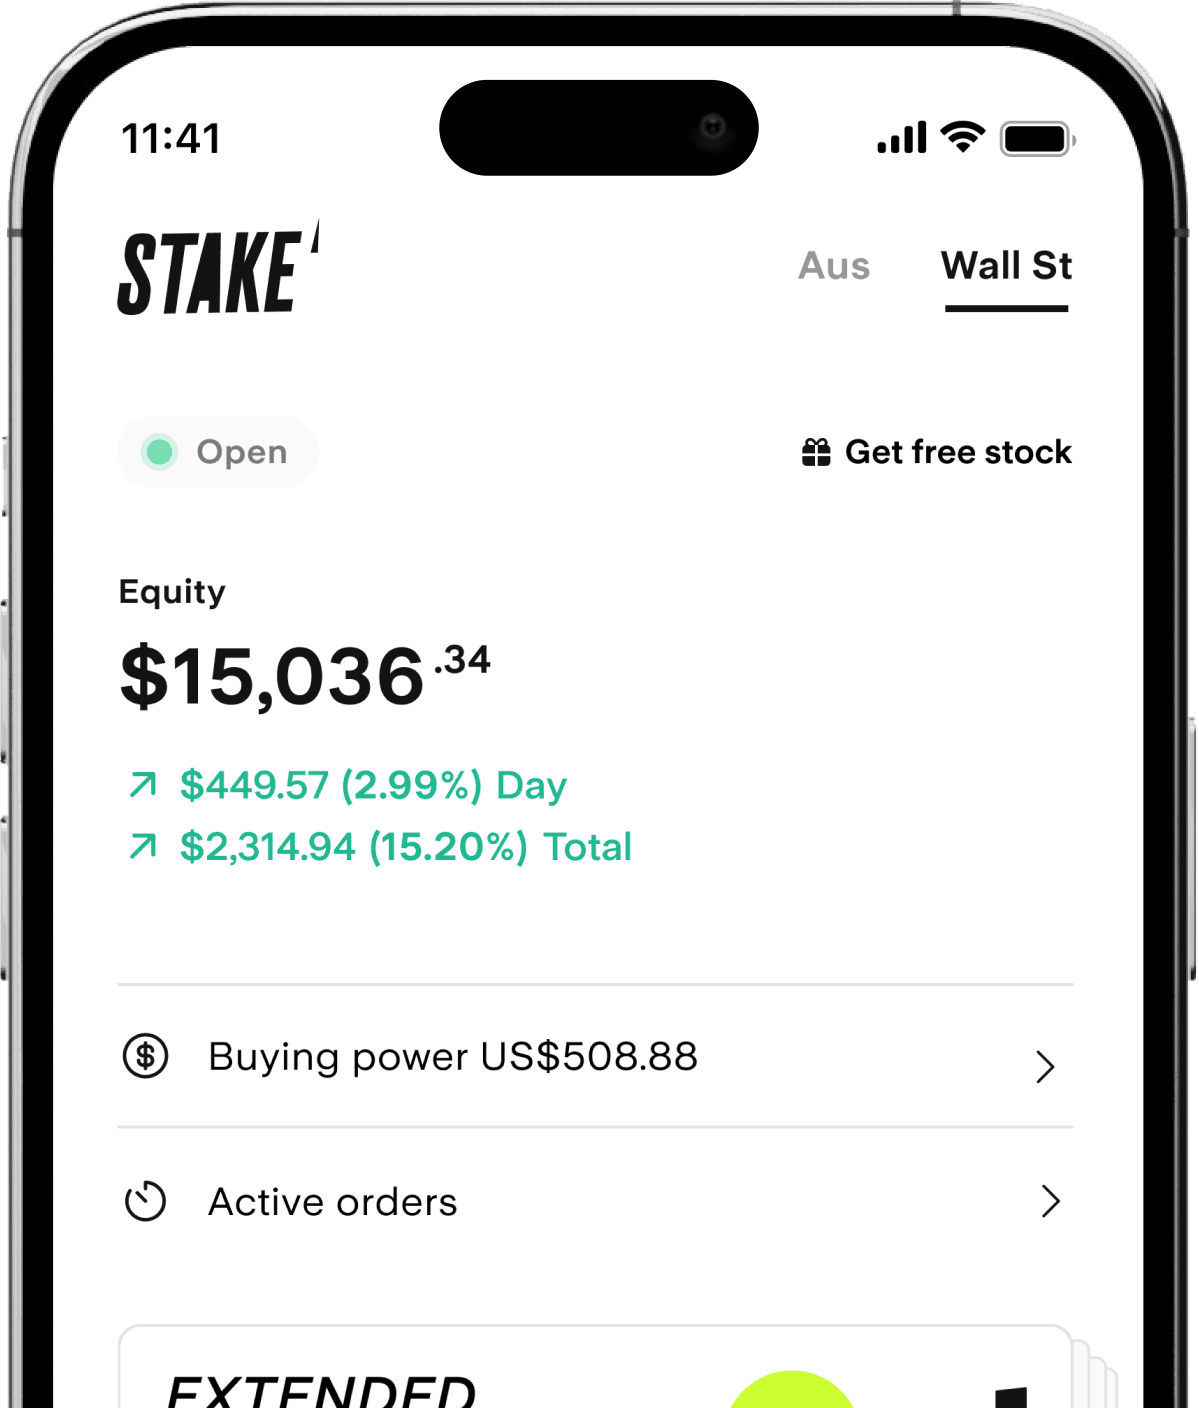 Stake phone application displaying the Markets screen